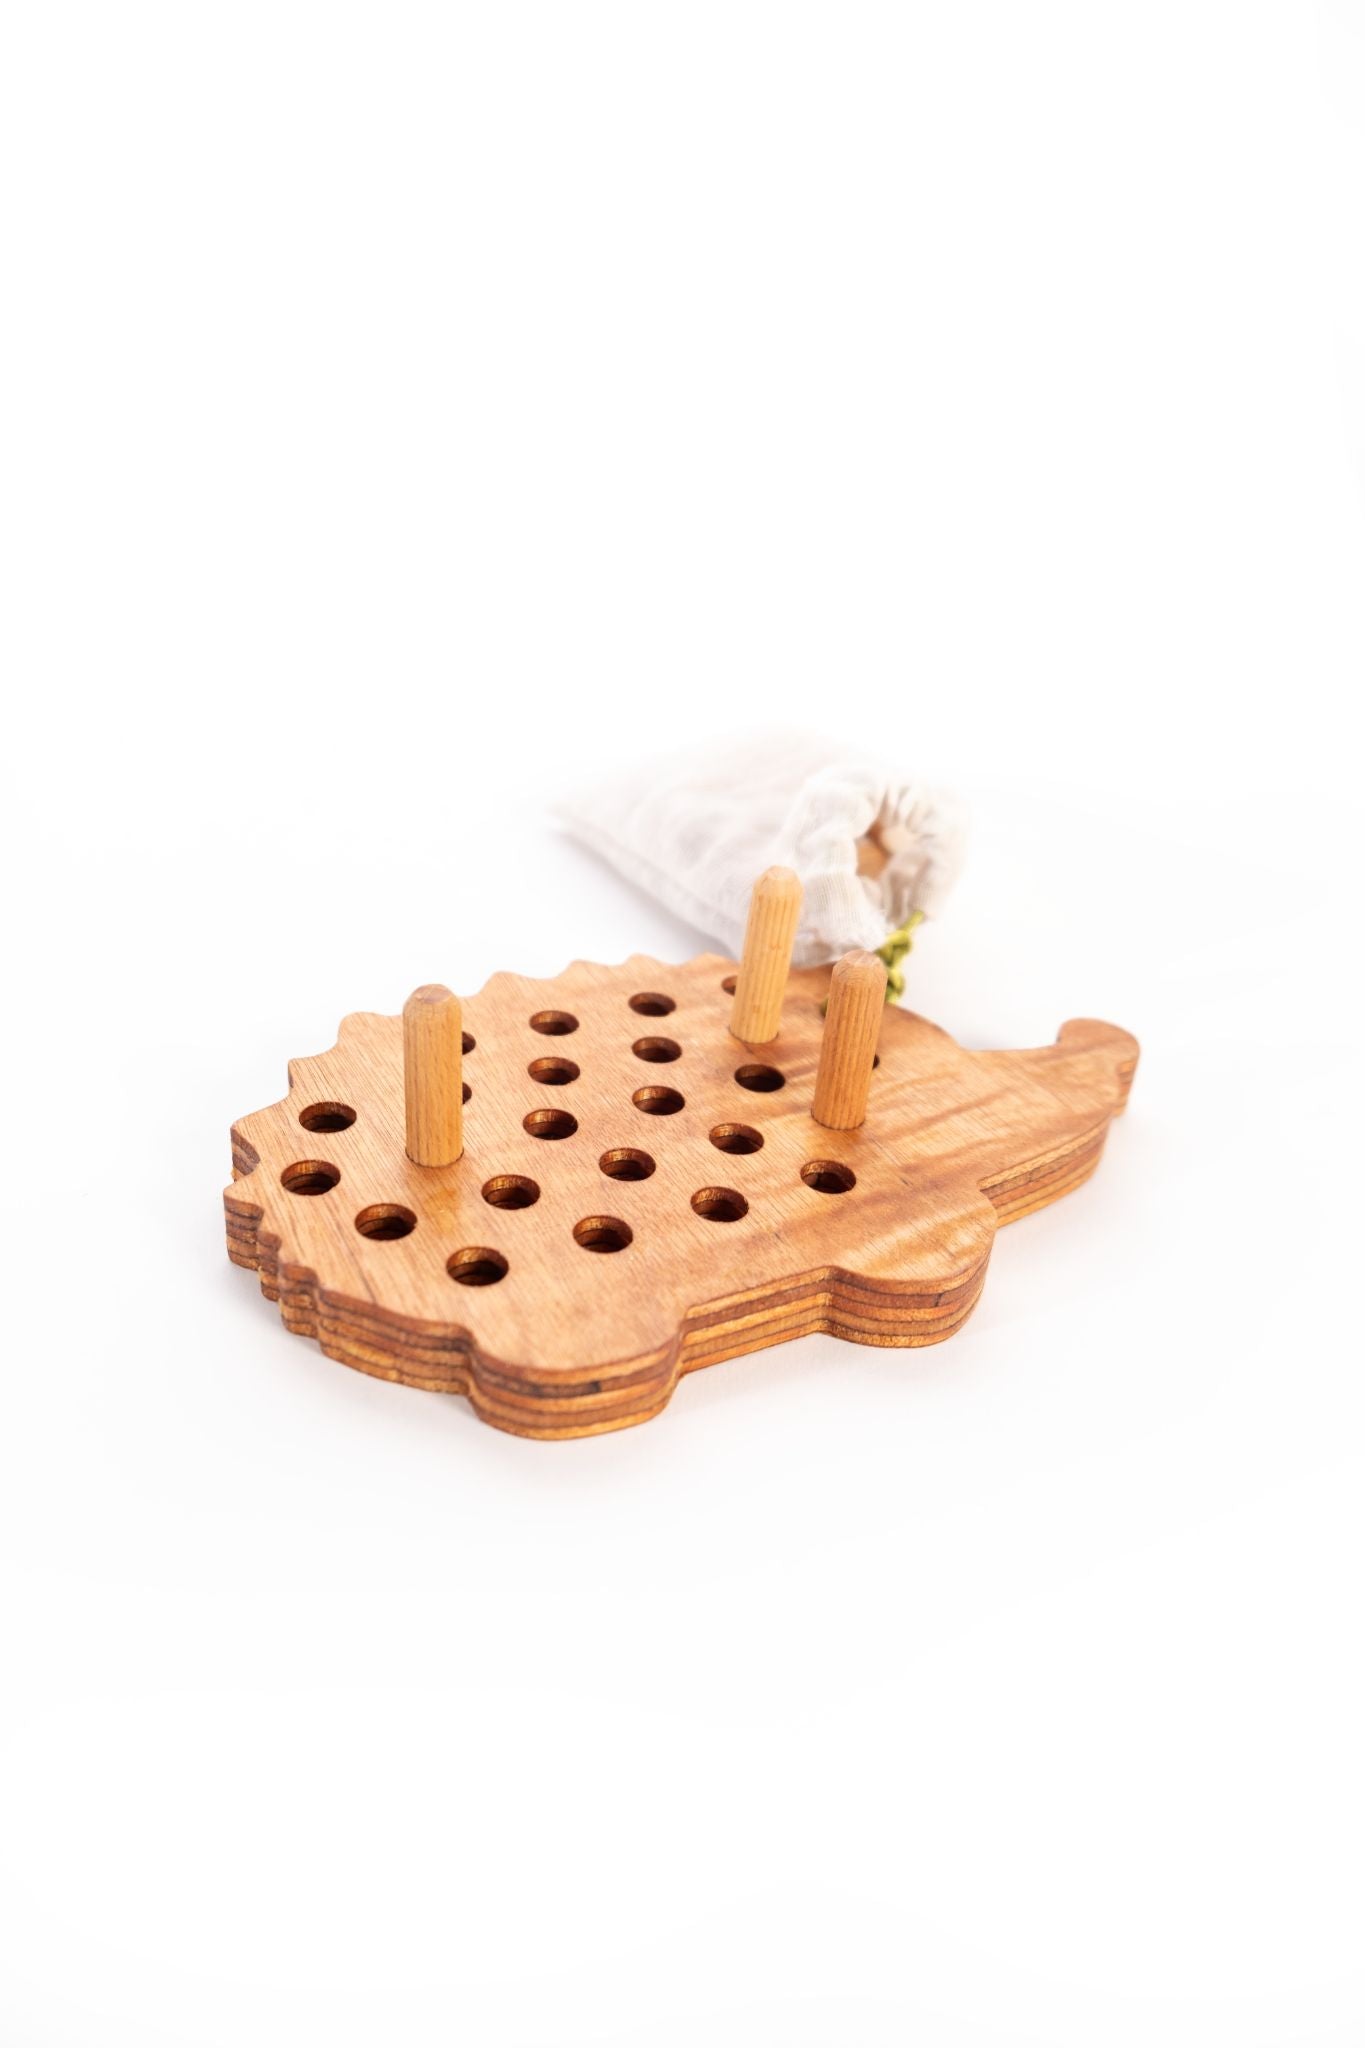 Wooden porcupine Game